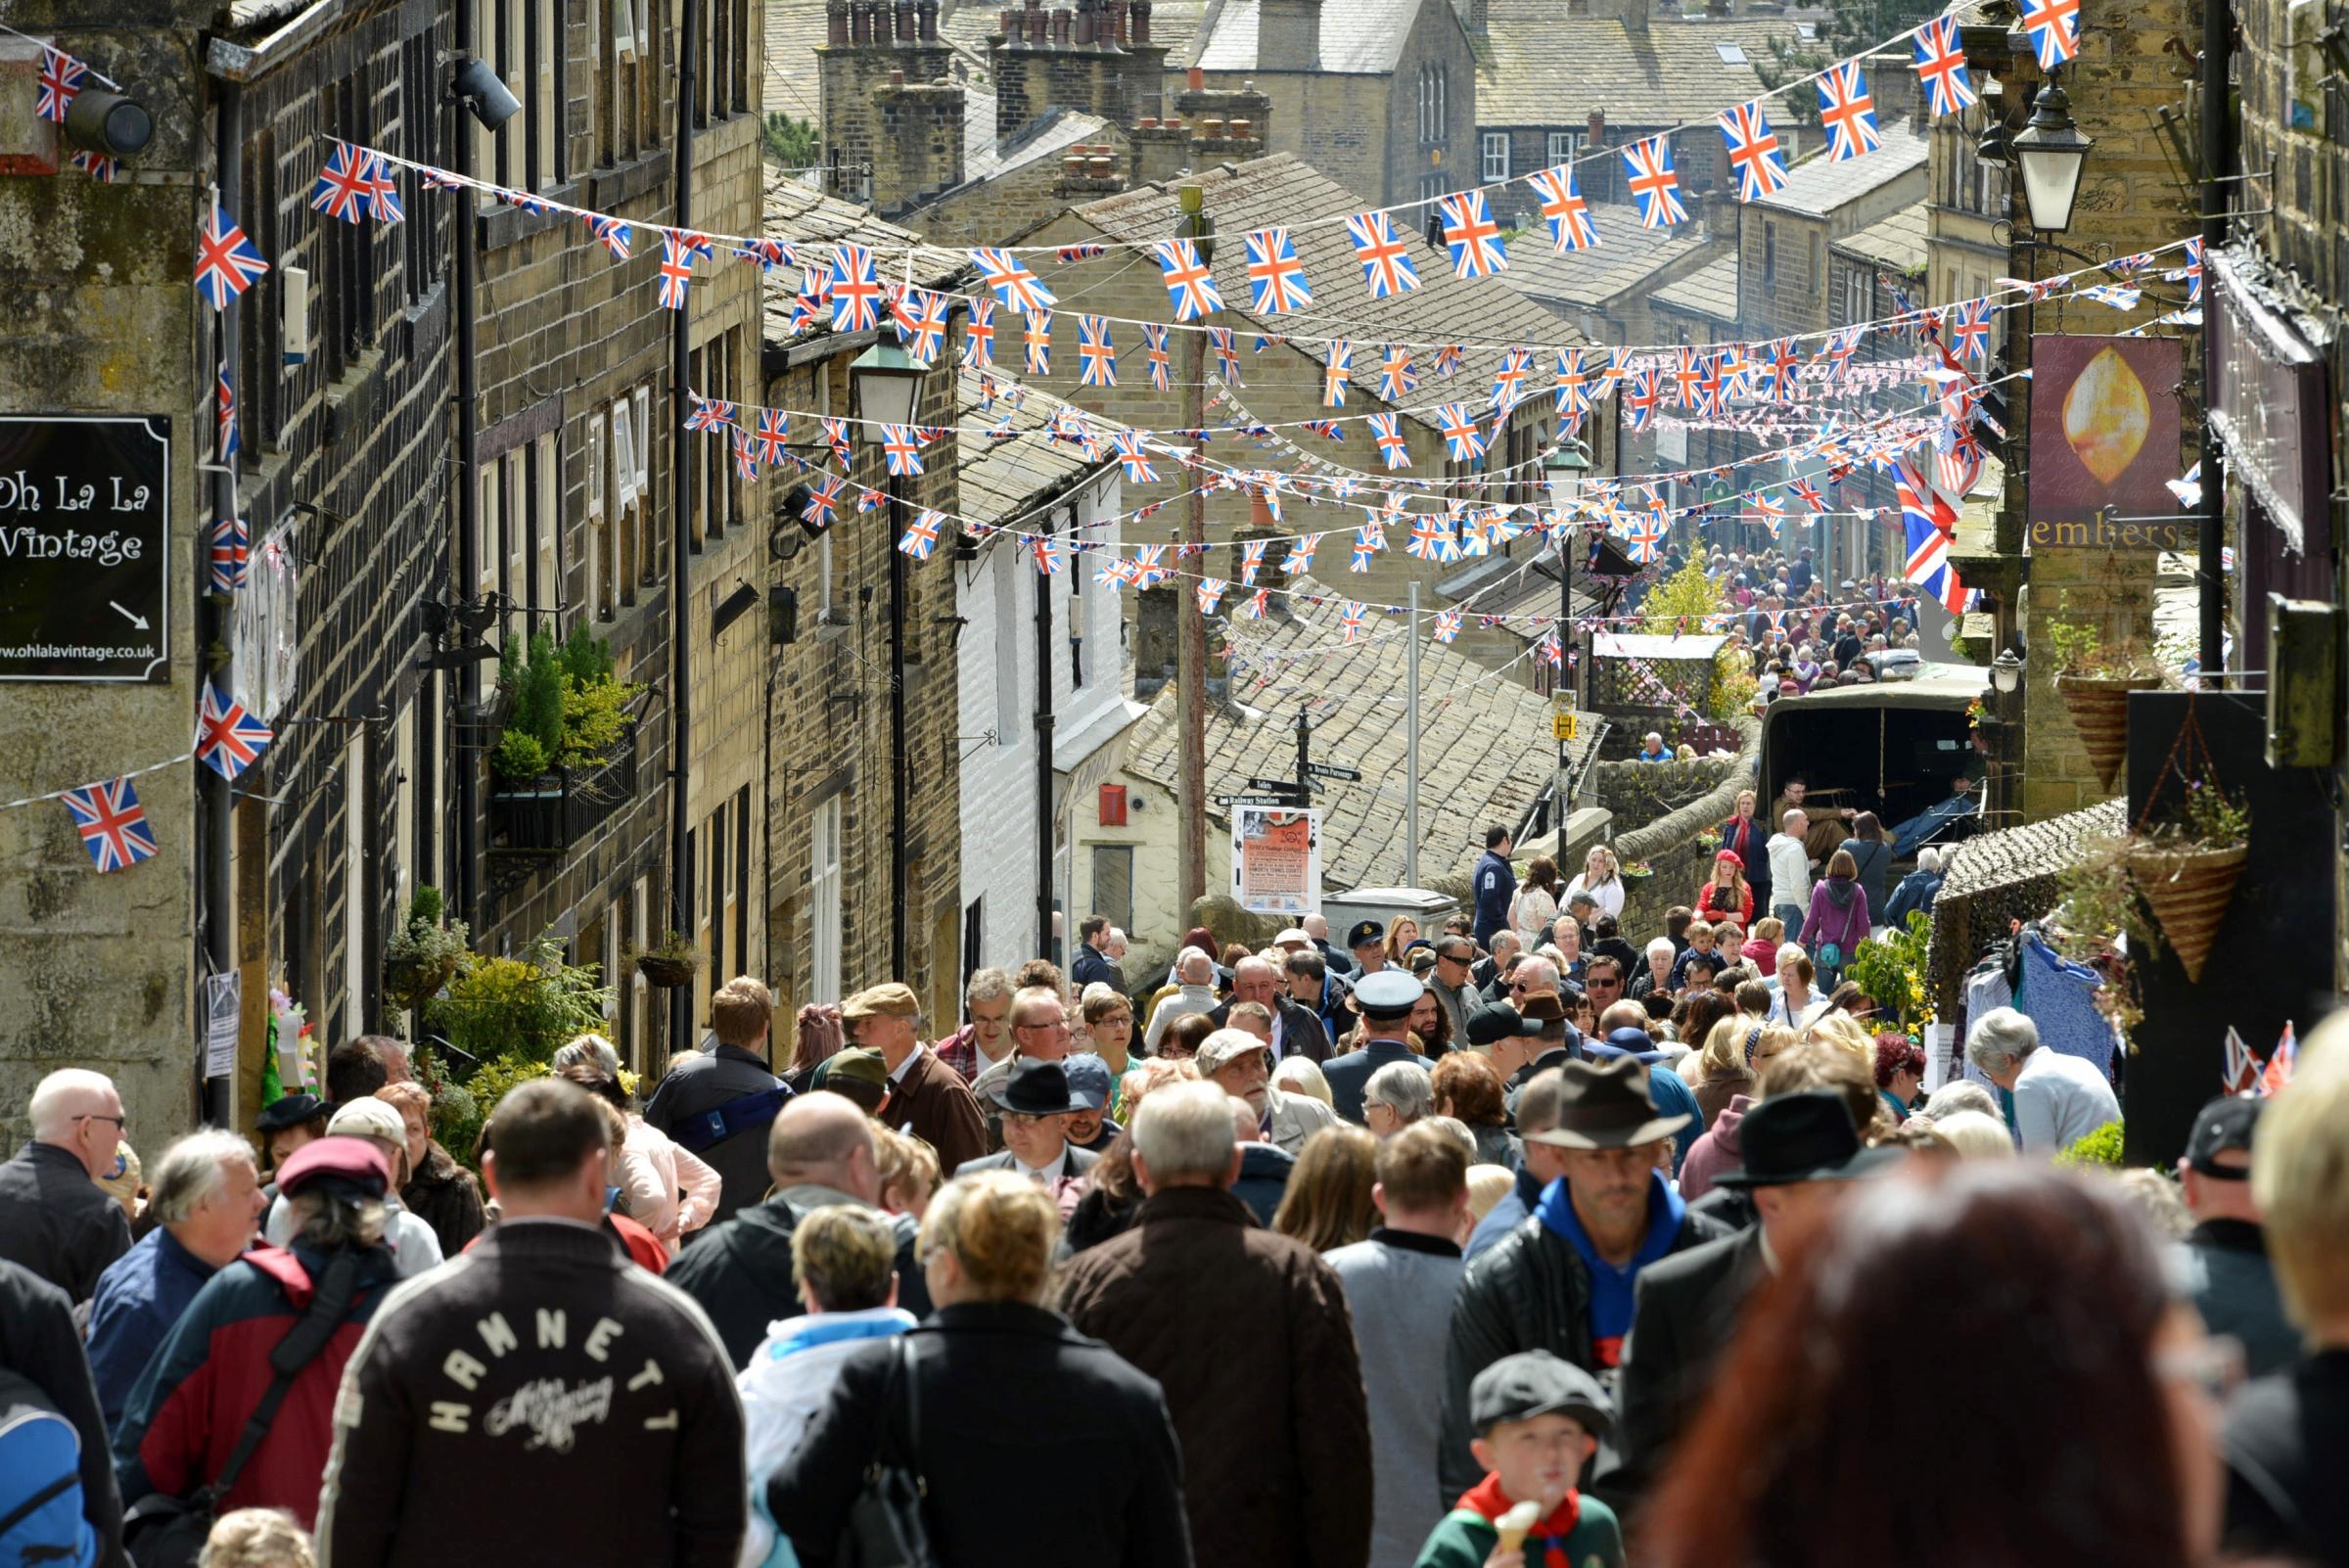 Drive to raise £10,000 to employ professionals to help stage 2019 Haworth 1940s Weekend